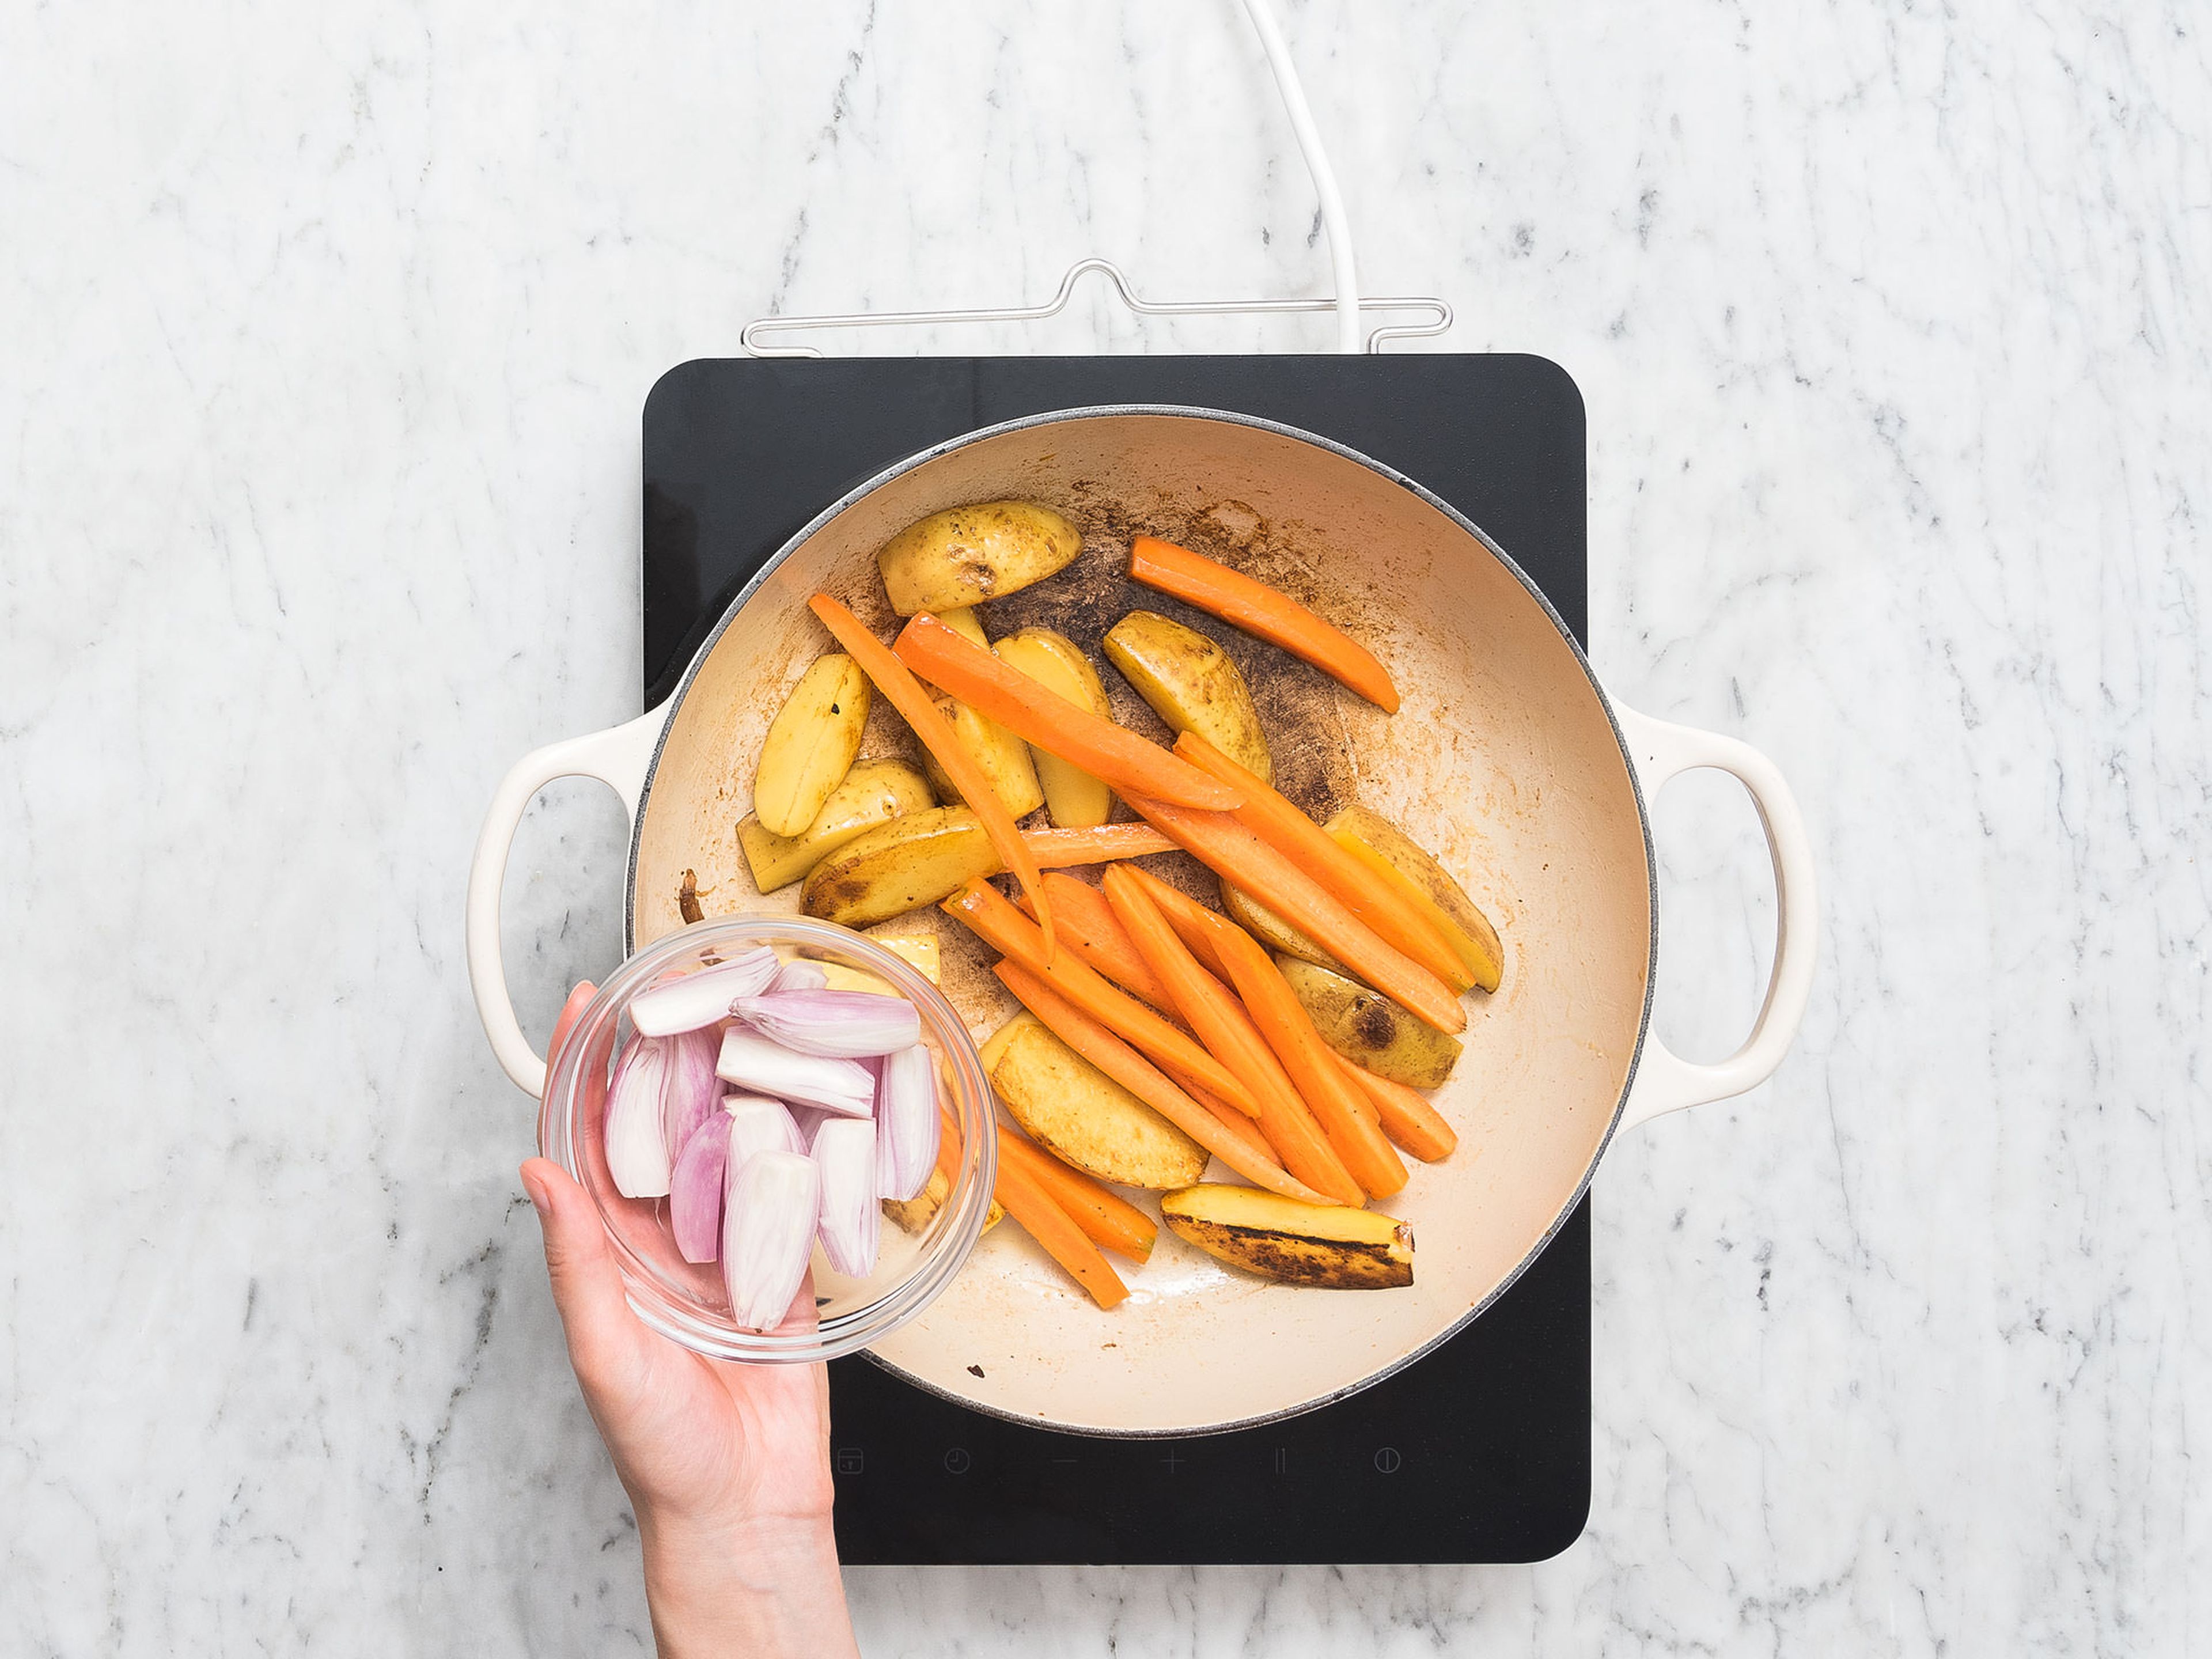 Add butter to pan and fry potato wedges for approx. 2 – 3 min. Add carrots and fry for approx. 2 – 3 min. more, then add shallots and continue to fry for approx. 1 – 2 min. Season with salt and pepper to taste.